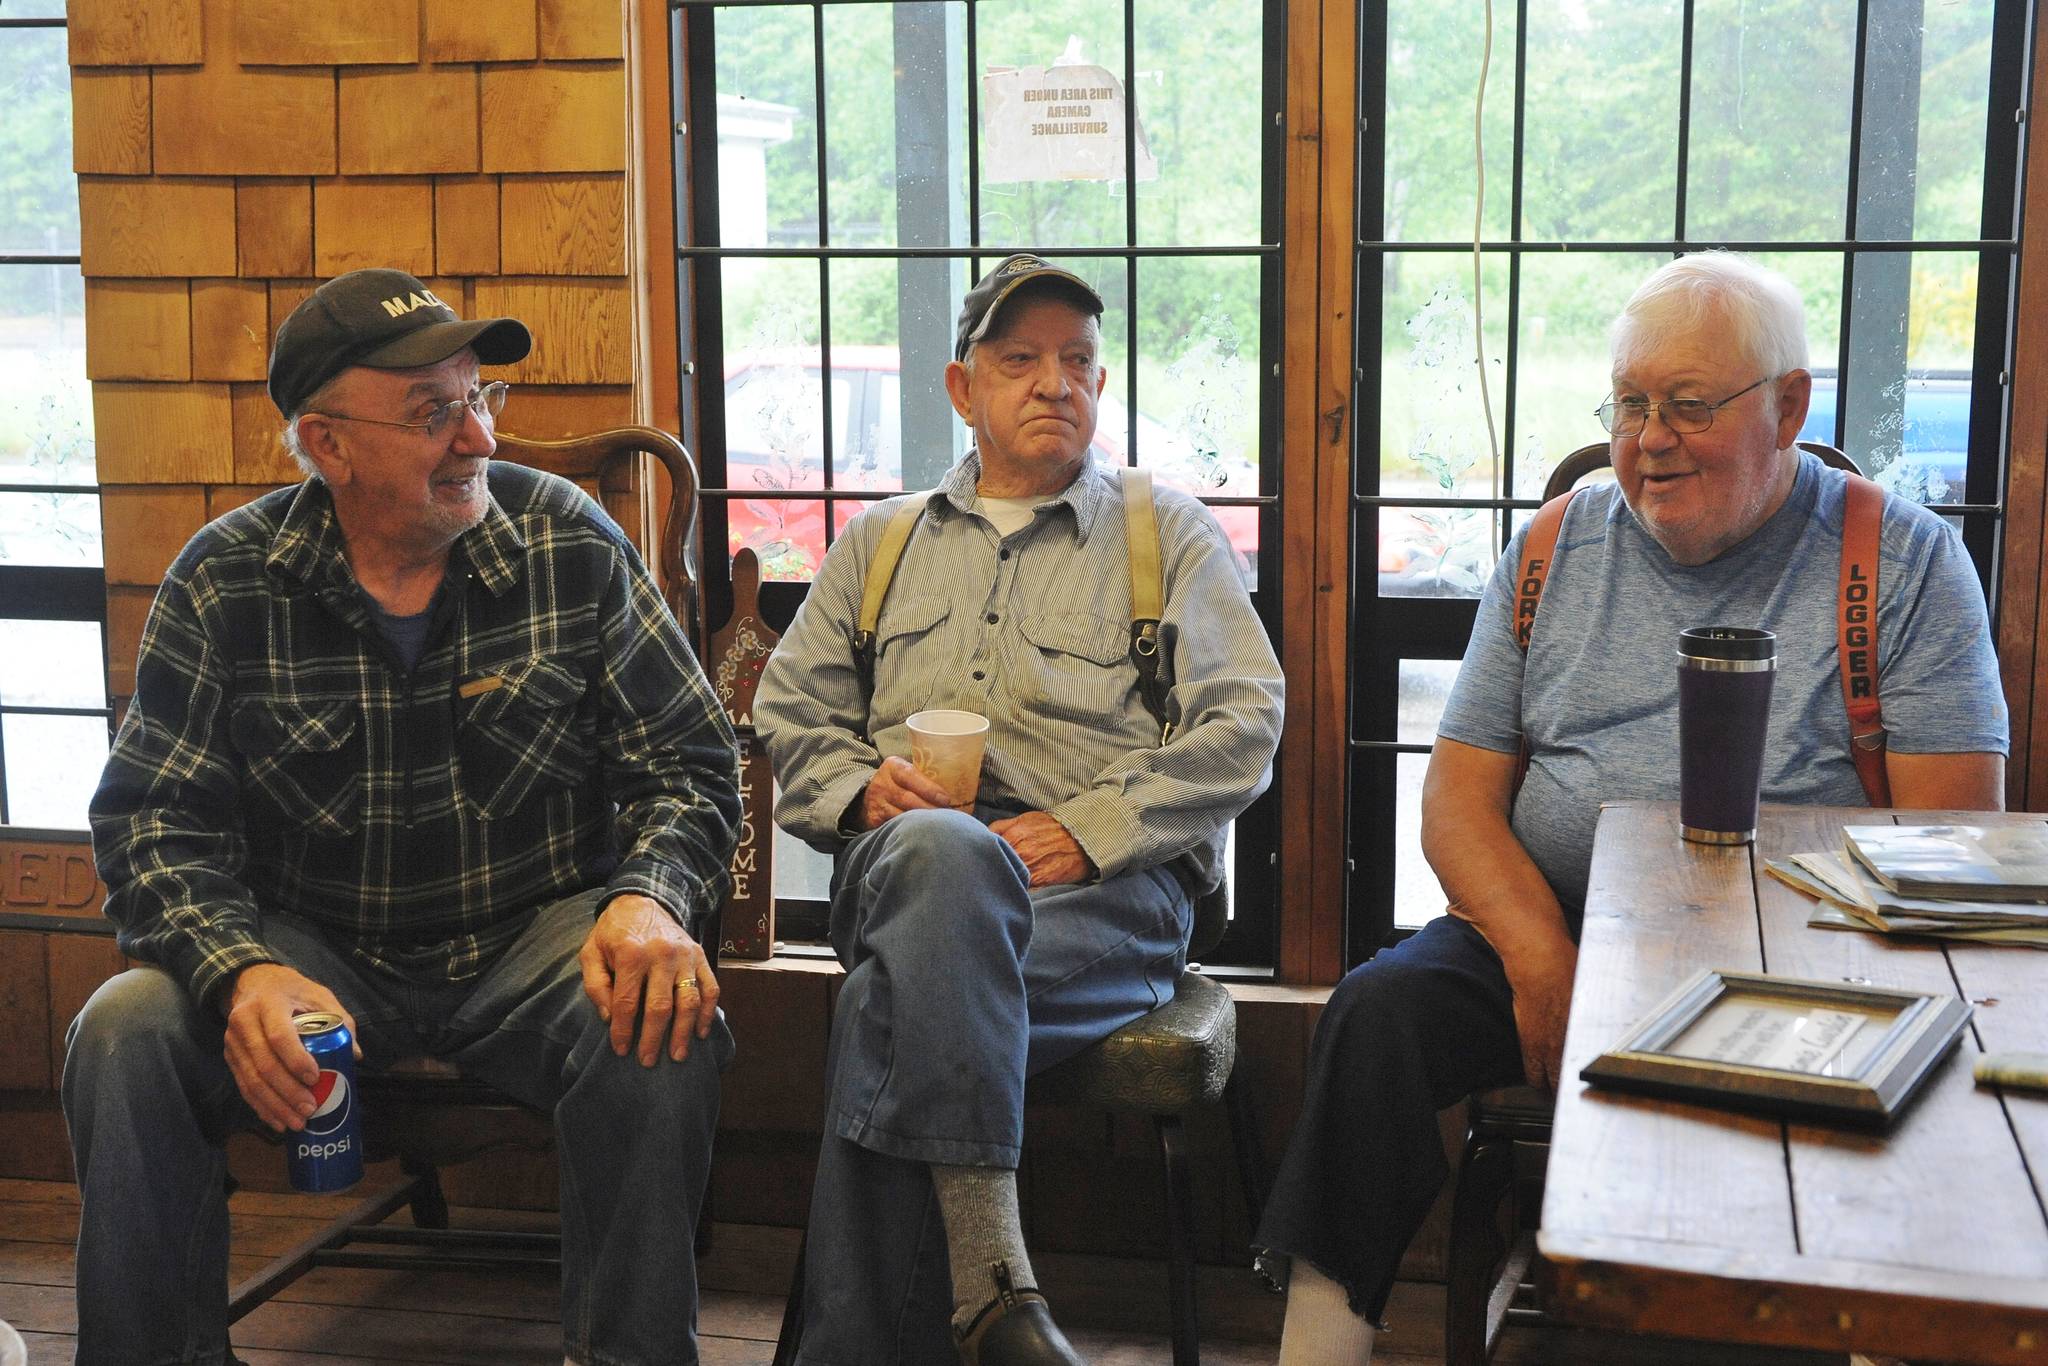 Richard Halverson, Pioneer Logger 2019, with Jack Banner, and Dean Hurn, on the right, Pioneer Logger Award winner for 2020. This photo was taken by Lonnie Archibald during past coffee hours at the Lake Pleasant Grocery where truckers, loggers, fishermen, mill rites, etc. once met to discuss important things.